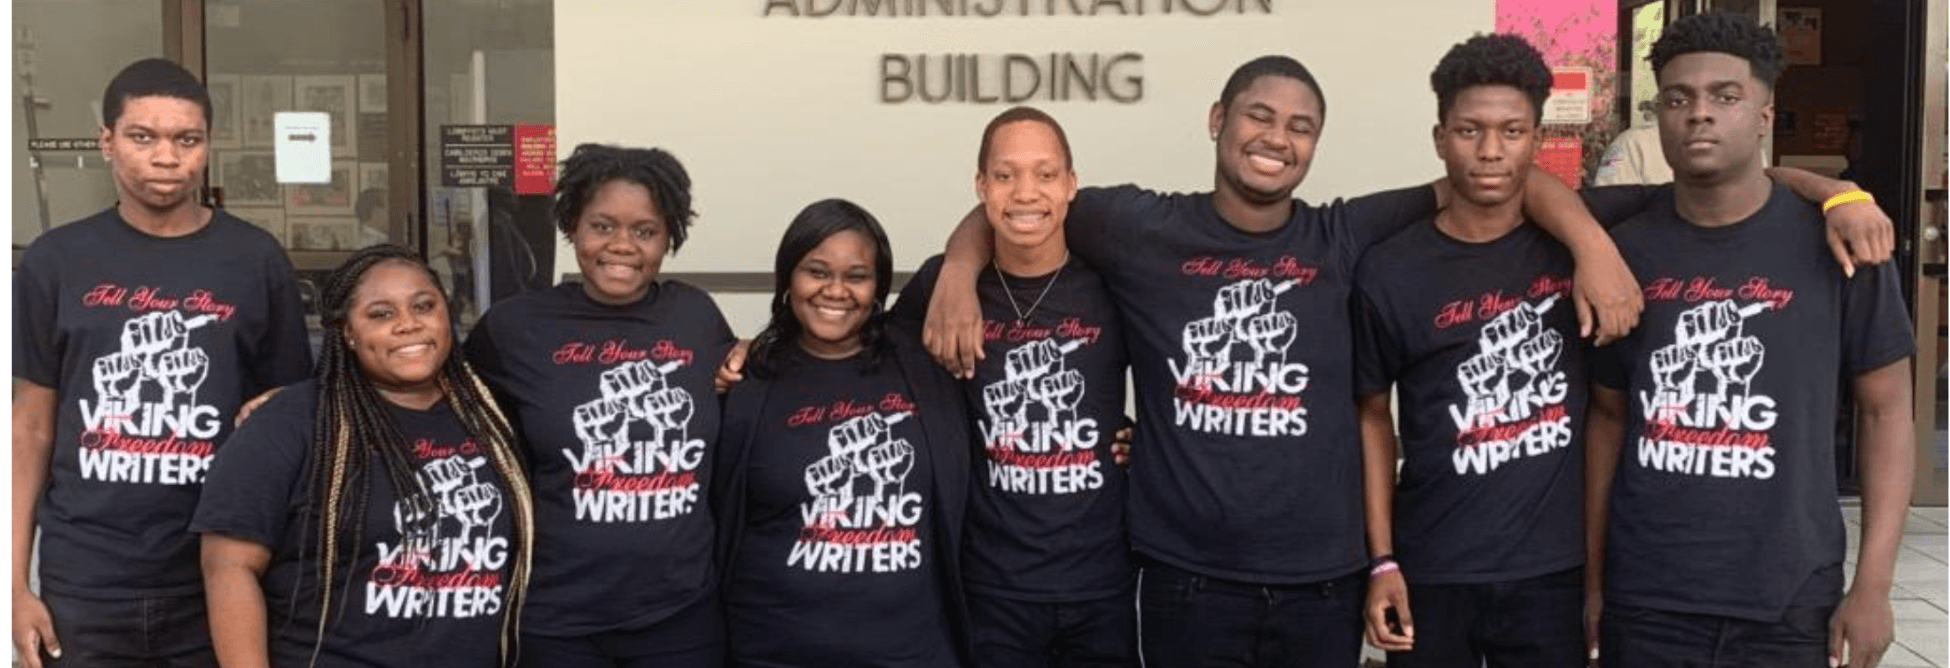 Dr. Symonette posing with several students all wearing shirts that say Viking Freedom Writers